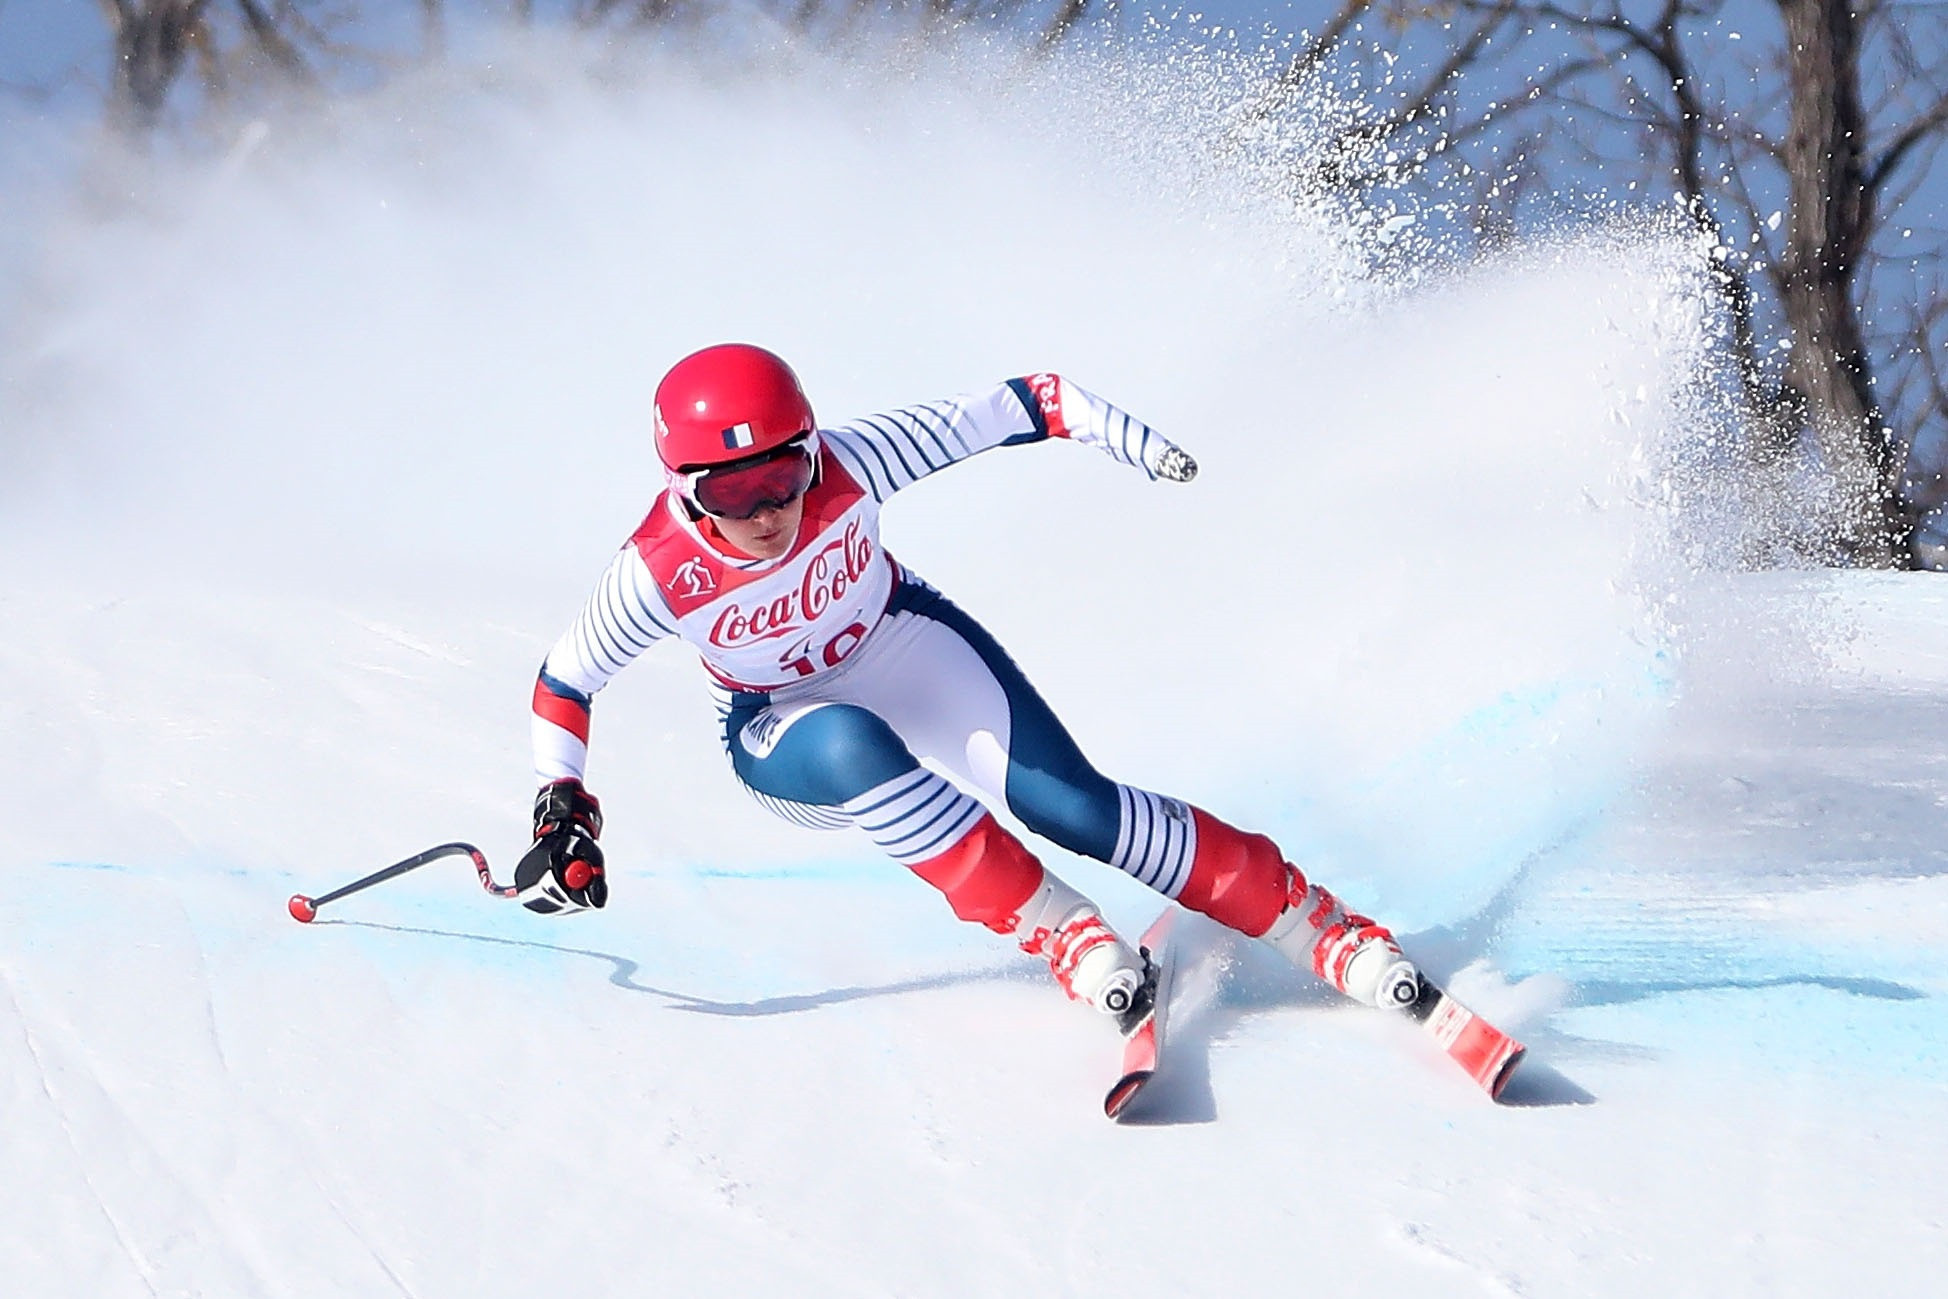 France's Marie Bochet successfully defended her women's super-G standing title ©Getty Images